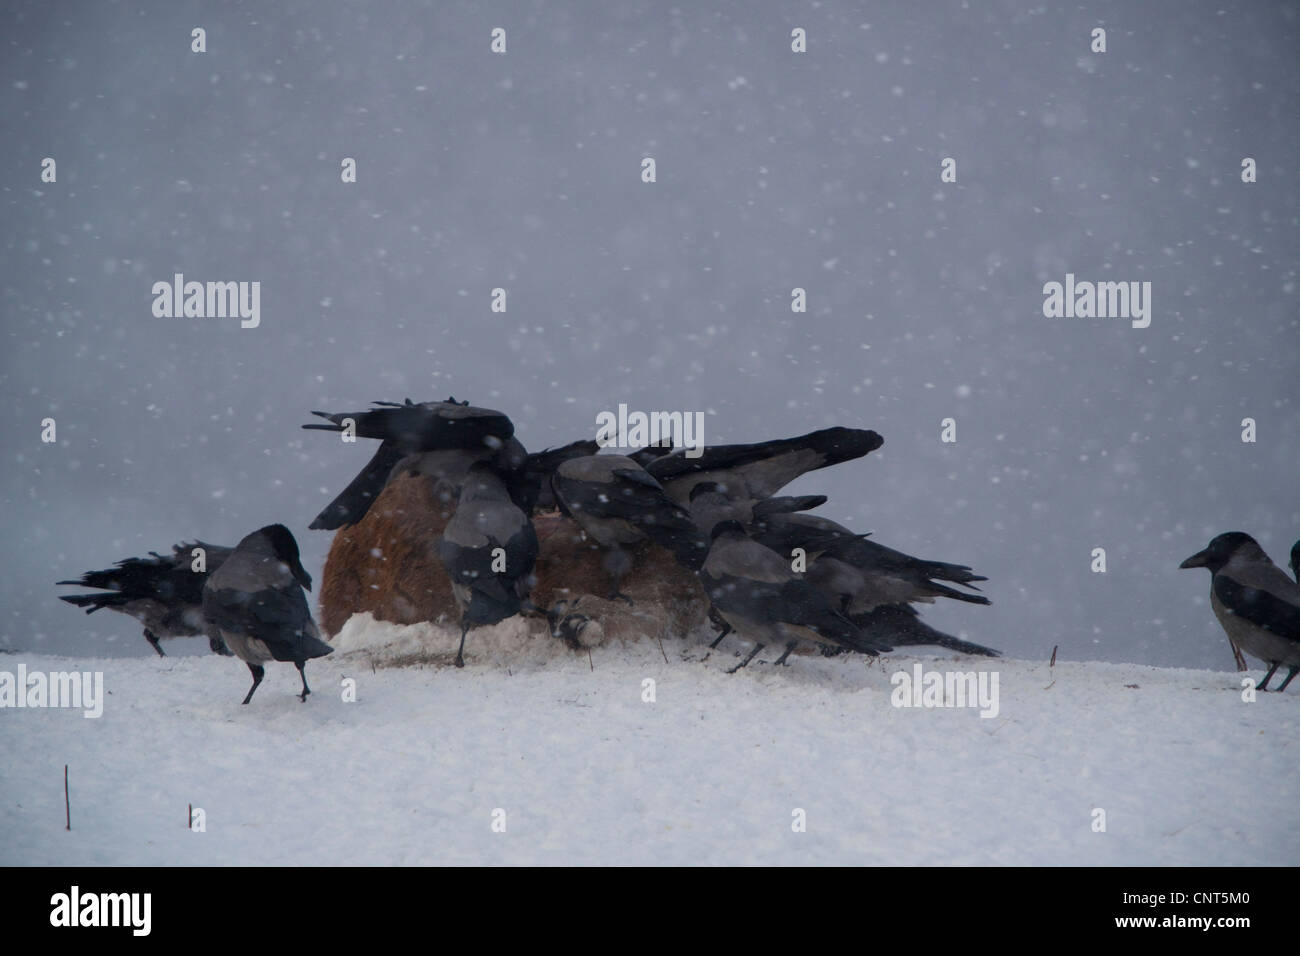 hooded crow (Corvus corone cornix), flock of crows at cadaver in snow, Norway Stock Photo